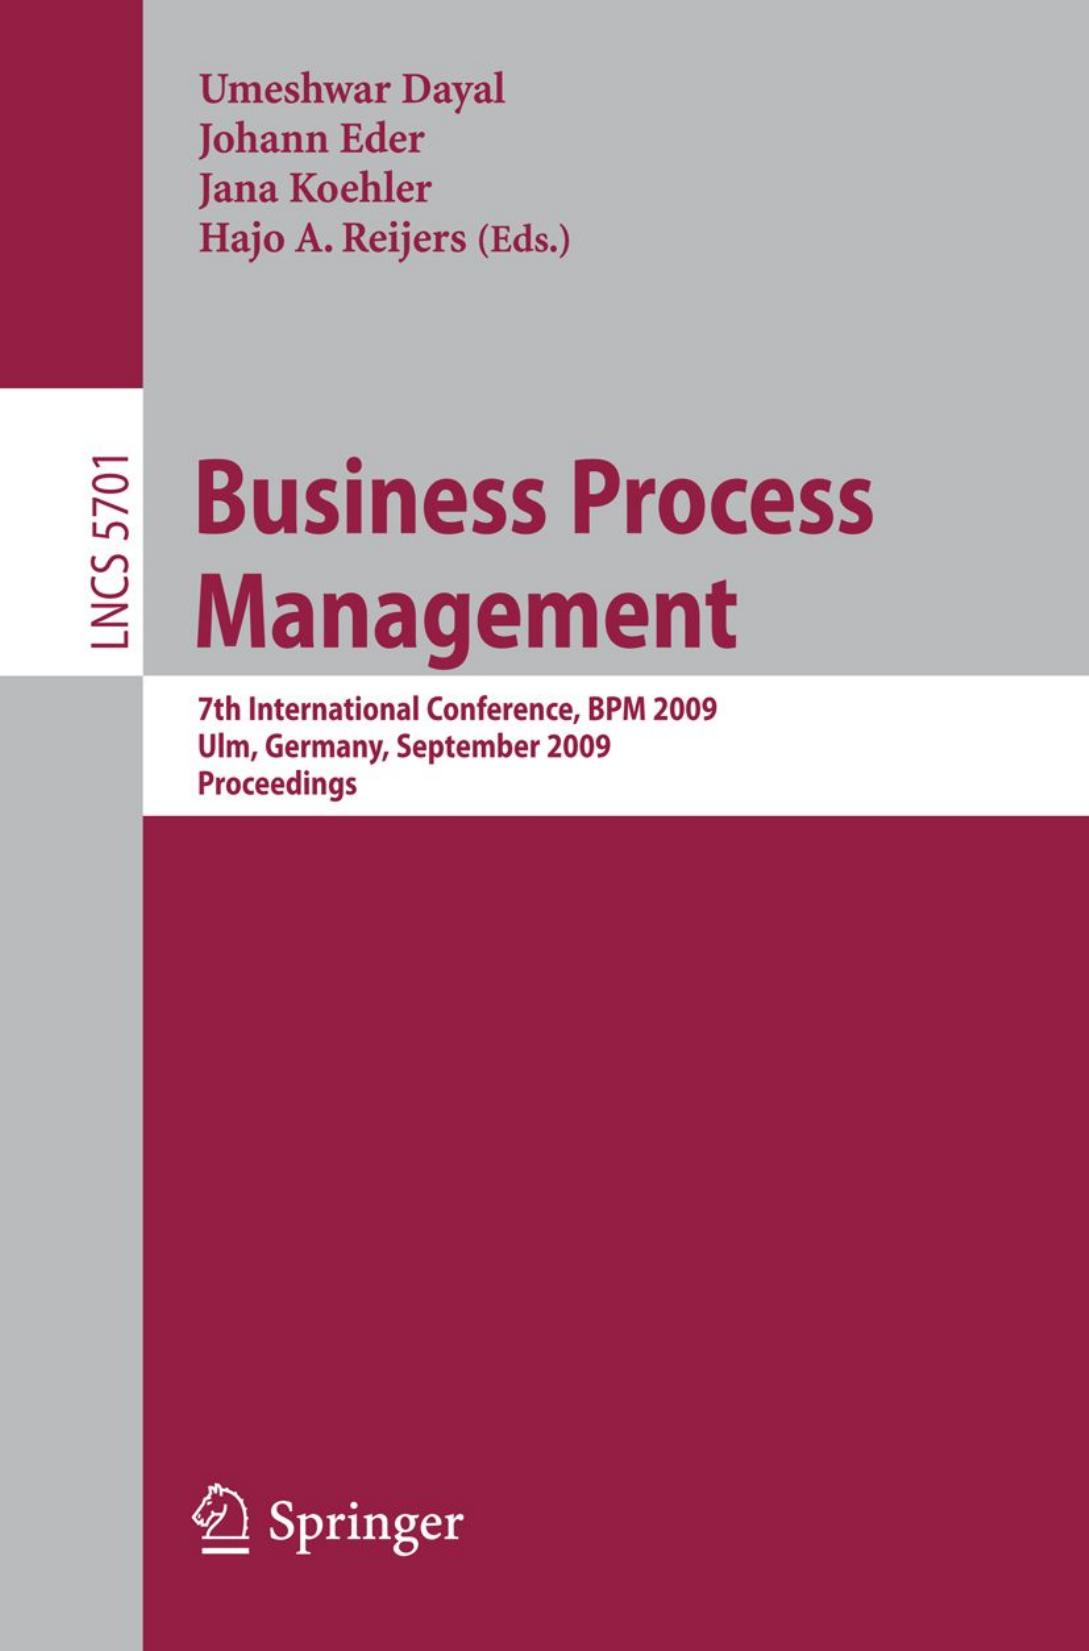 Business Process Management: 7th International Conference, BPM 2009, Ulm, Germany, September 8-10, 2009, Proceedings